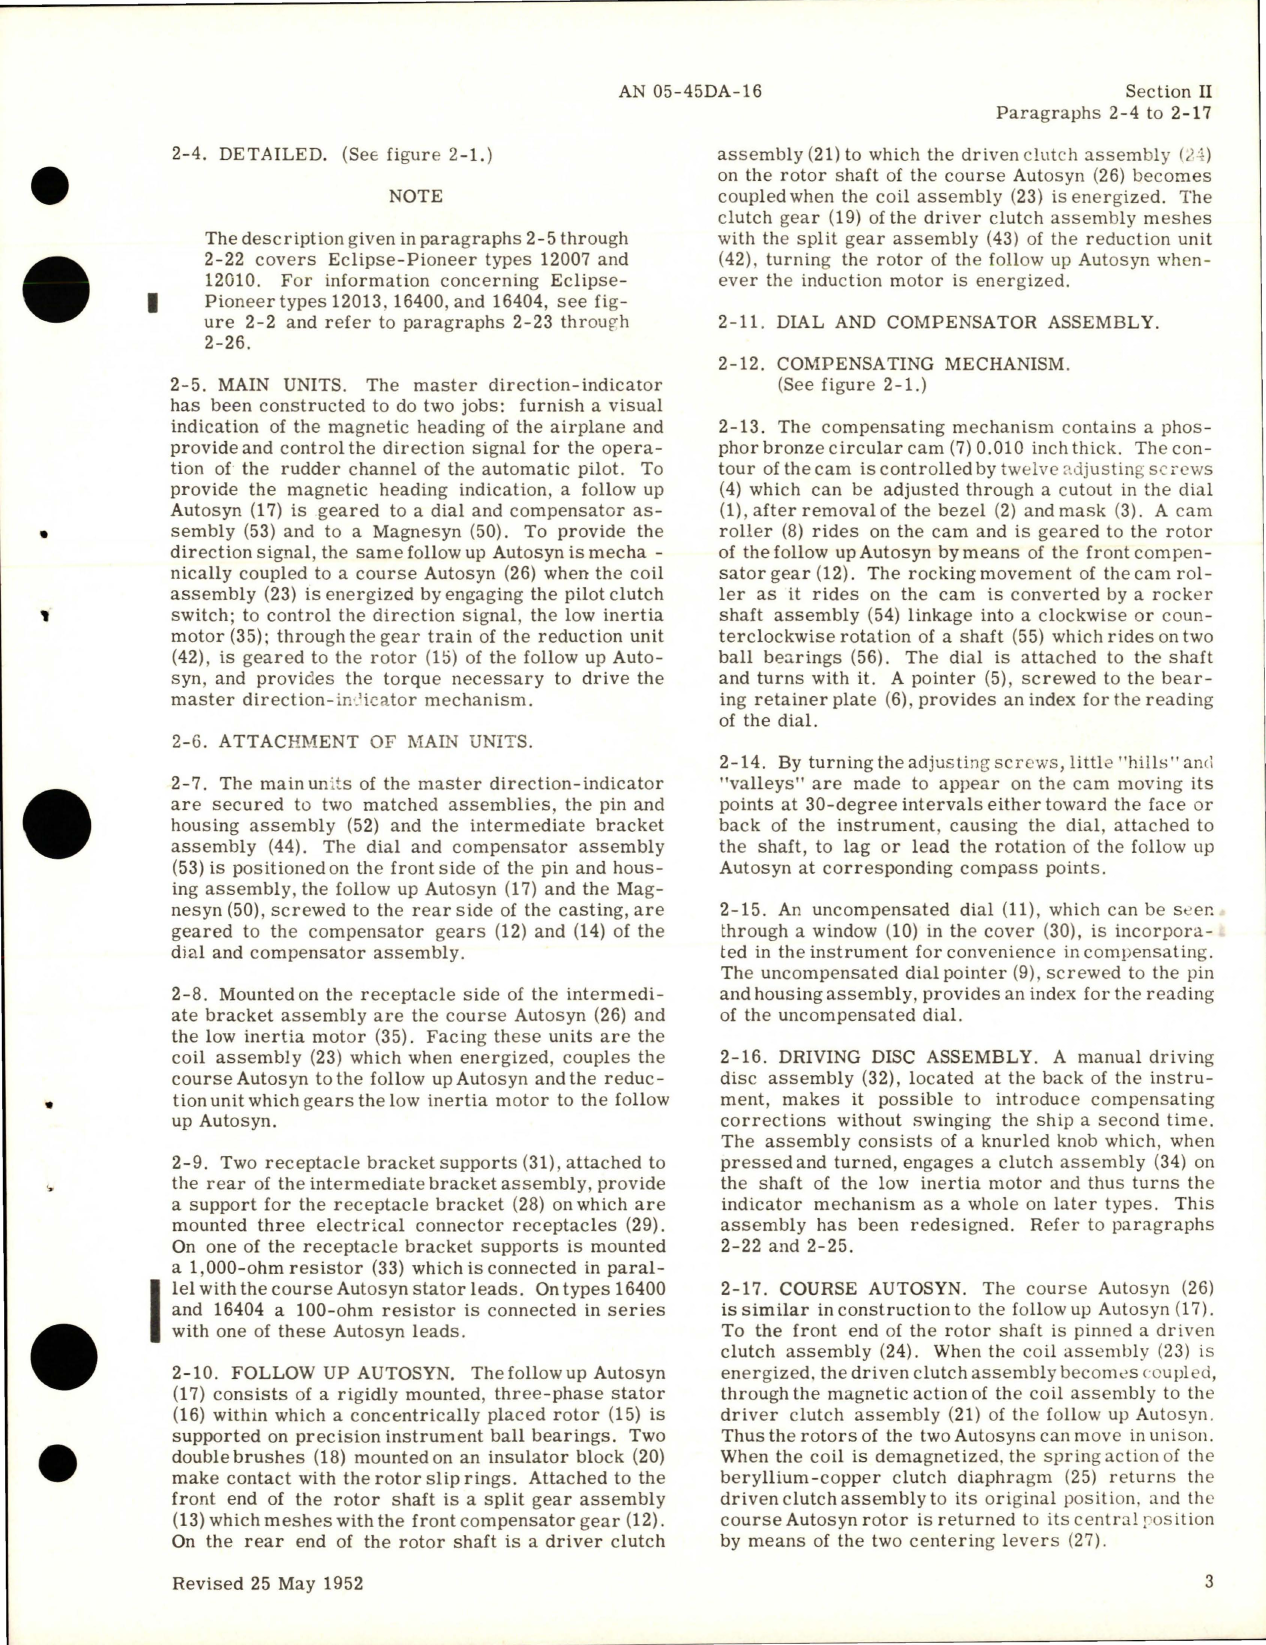 Sample page 7 from AirCorps Library document: Overhaul Instructions for Master Direction Indicators